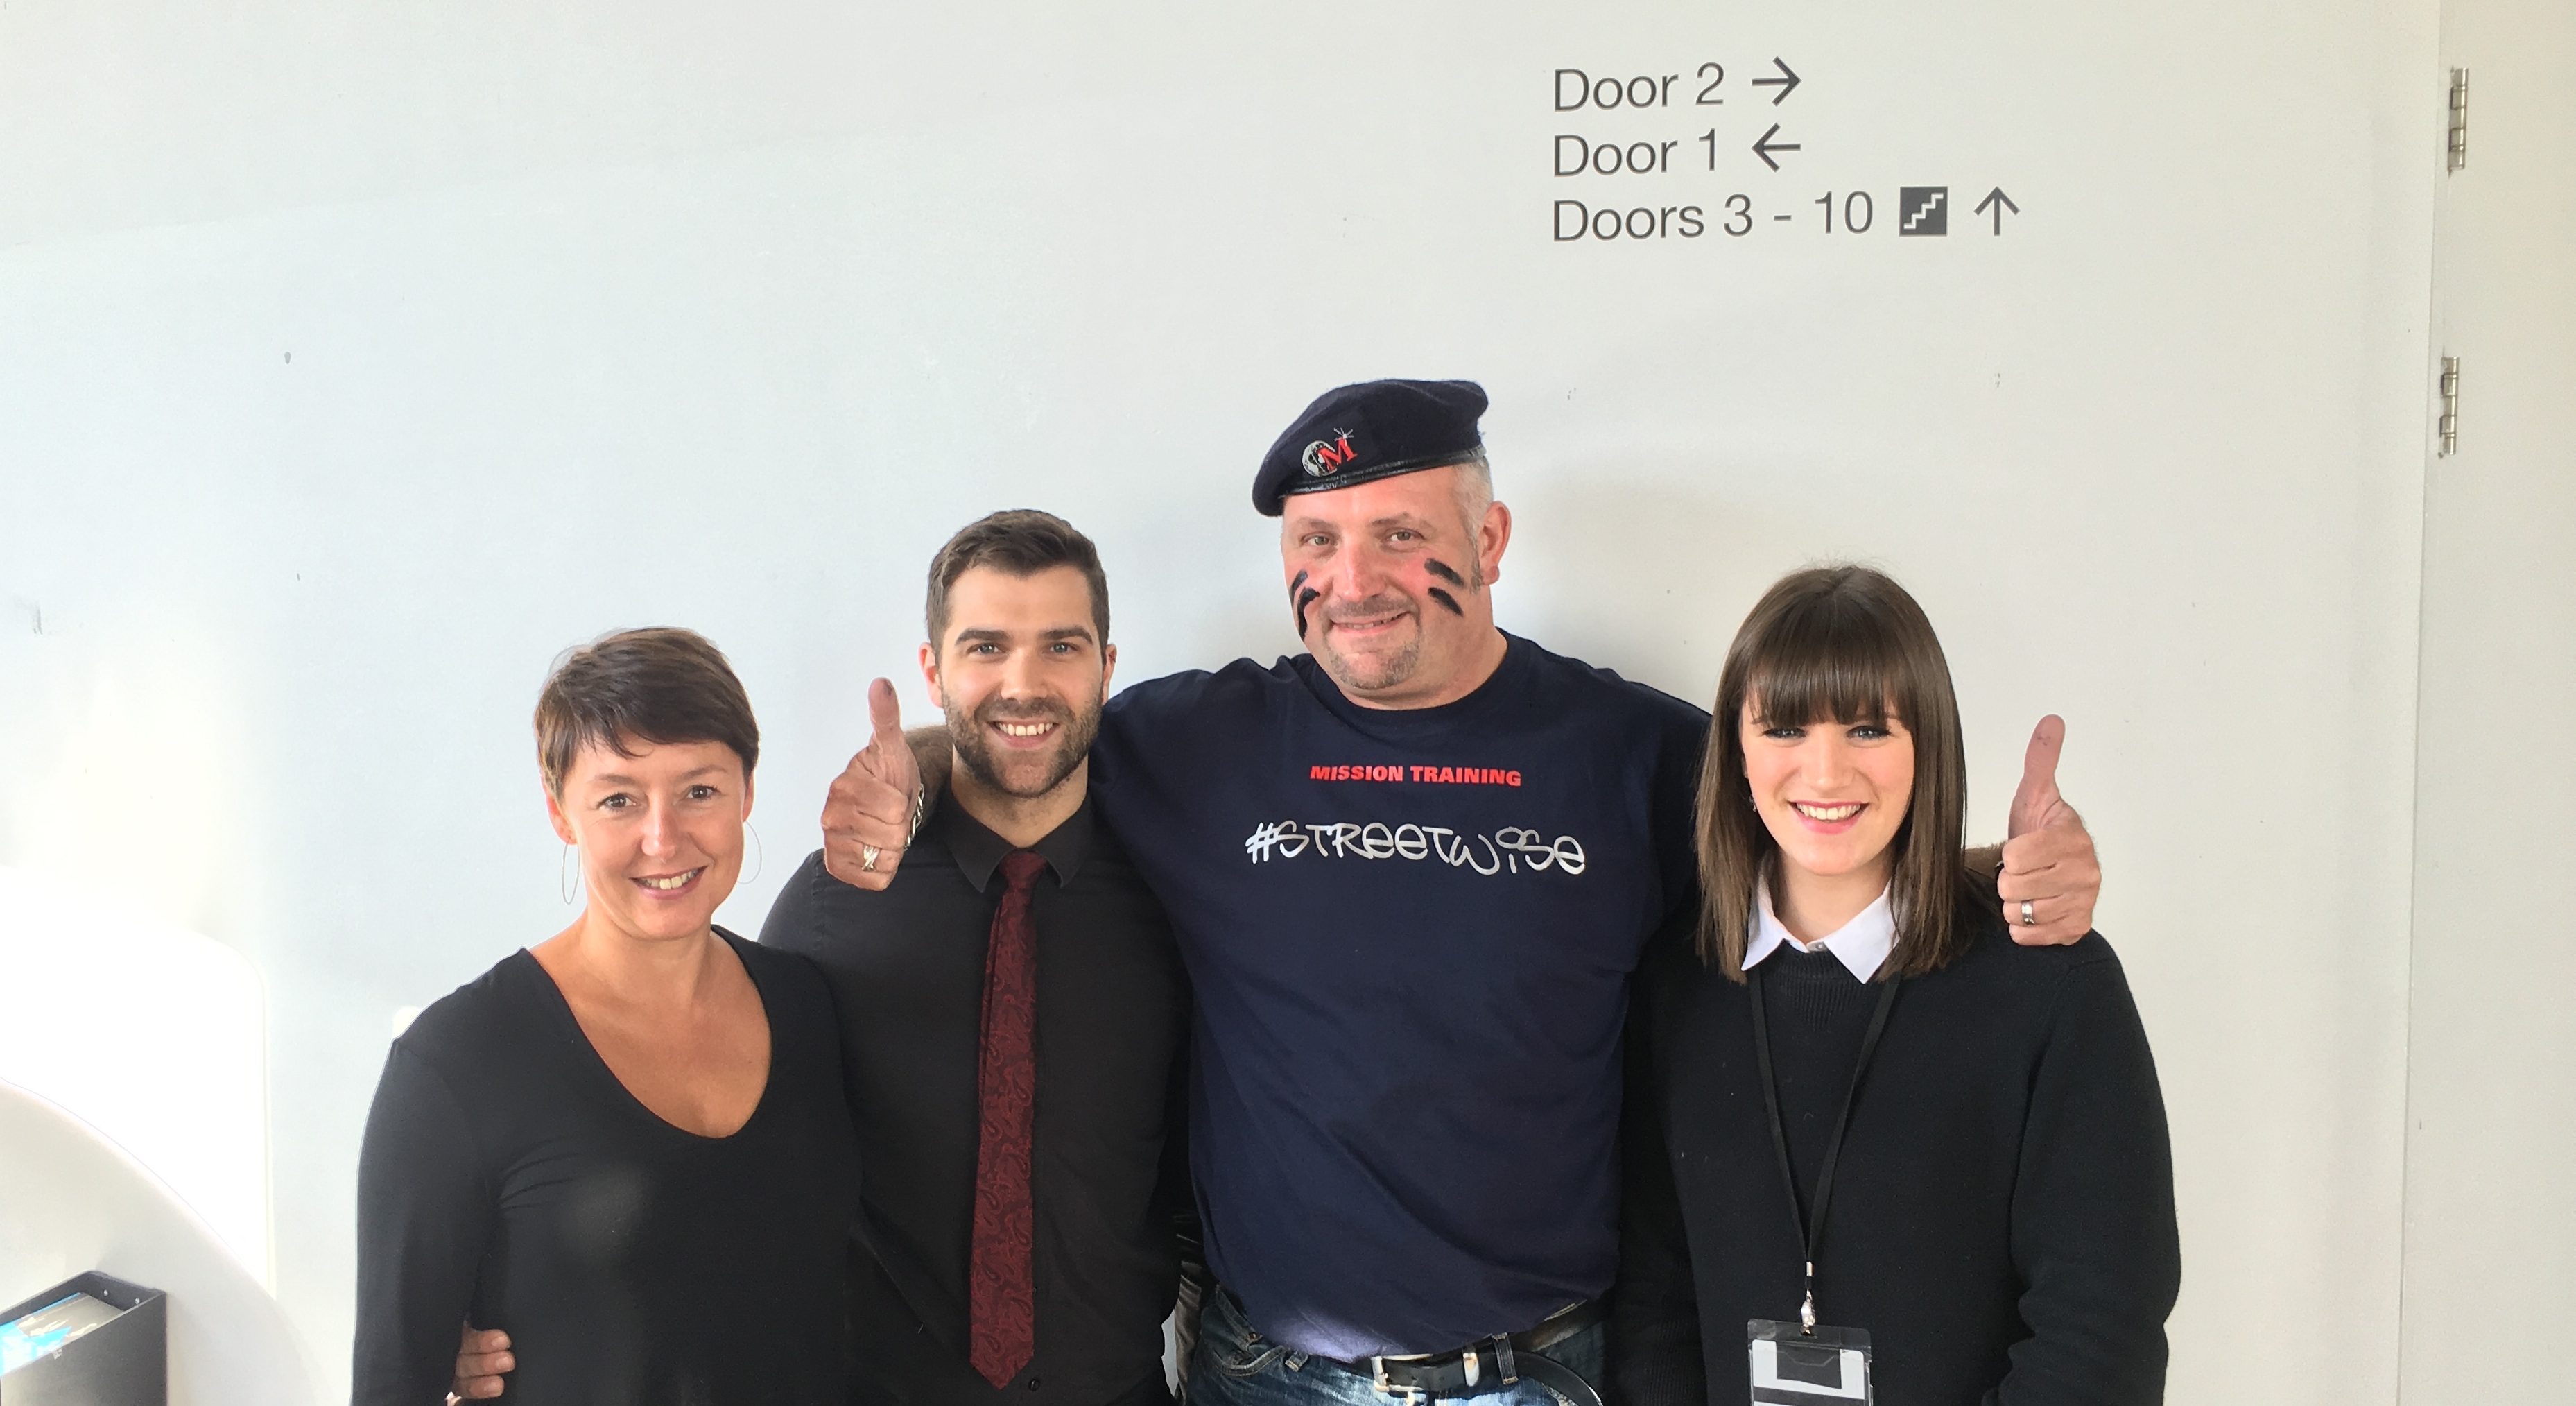 September 2016 - Maximus visited the team at The Marlowe Theatre